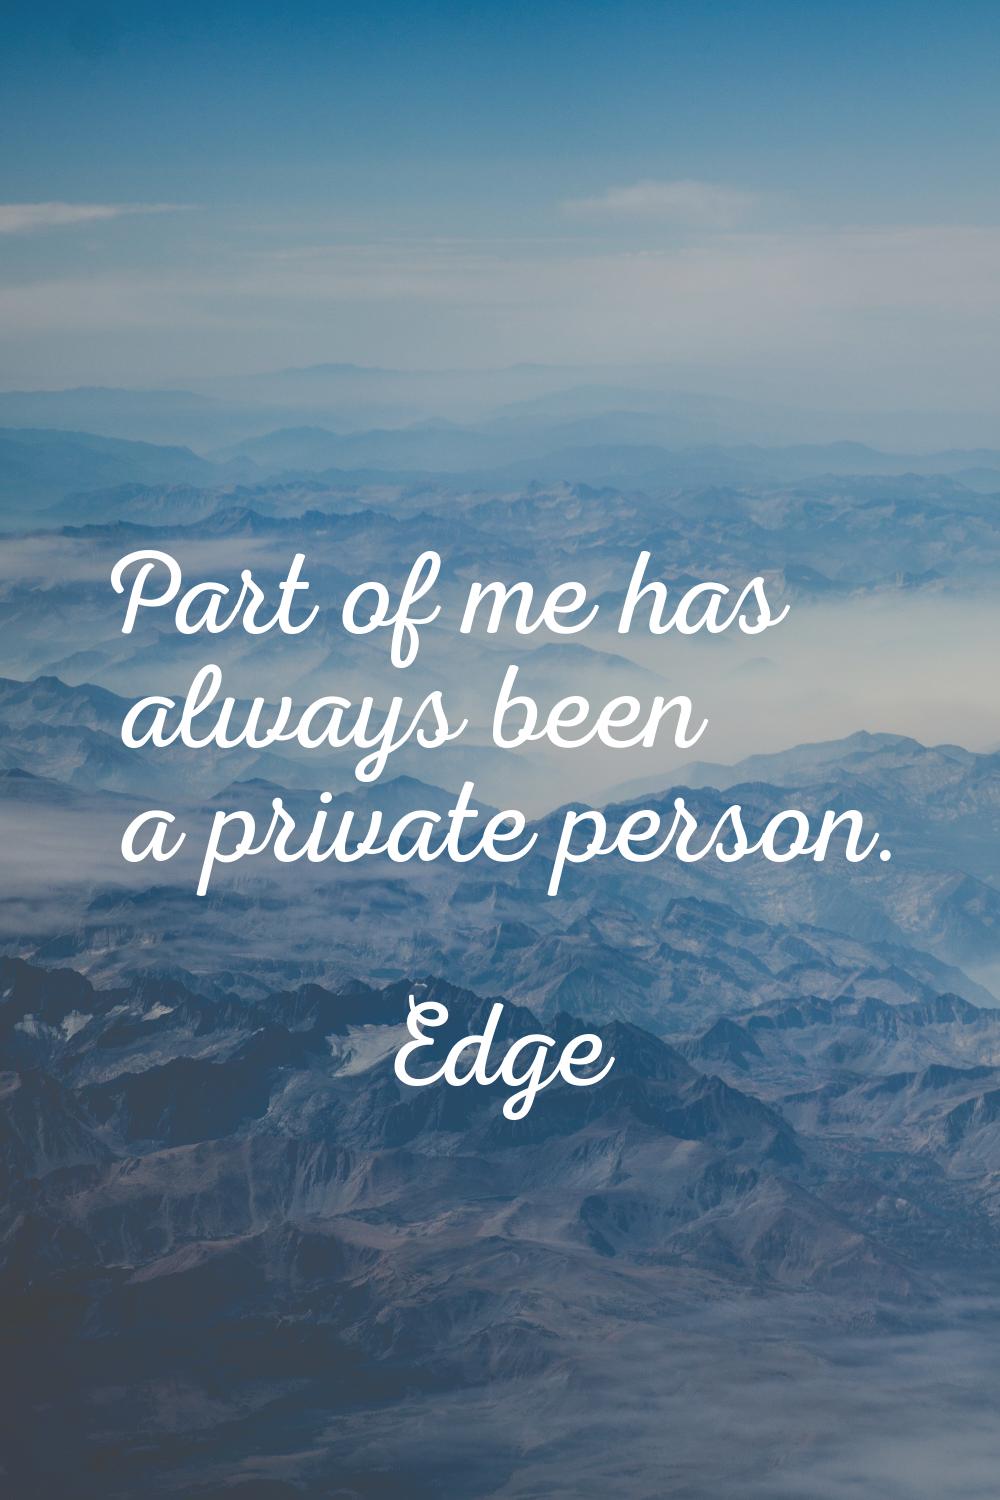 Part of me has always been a private person.